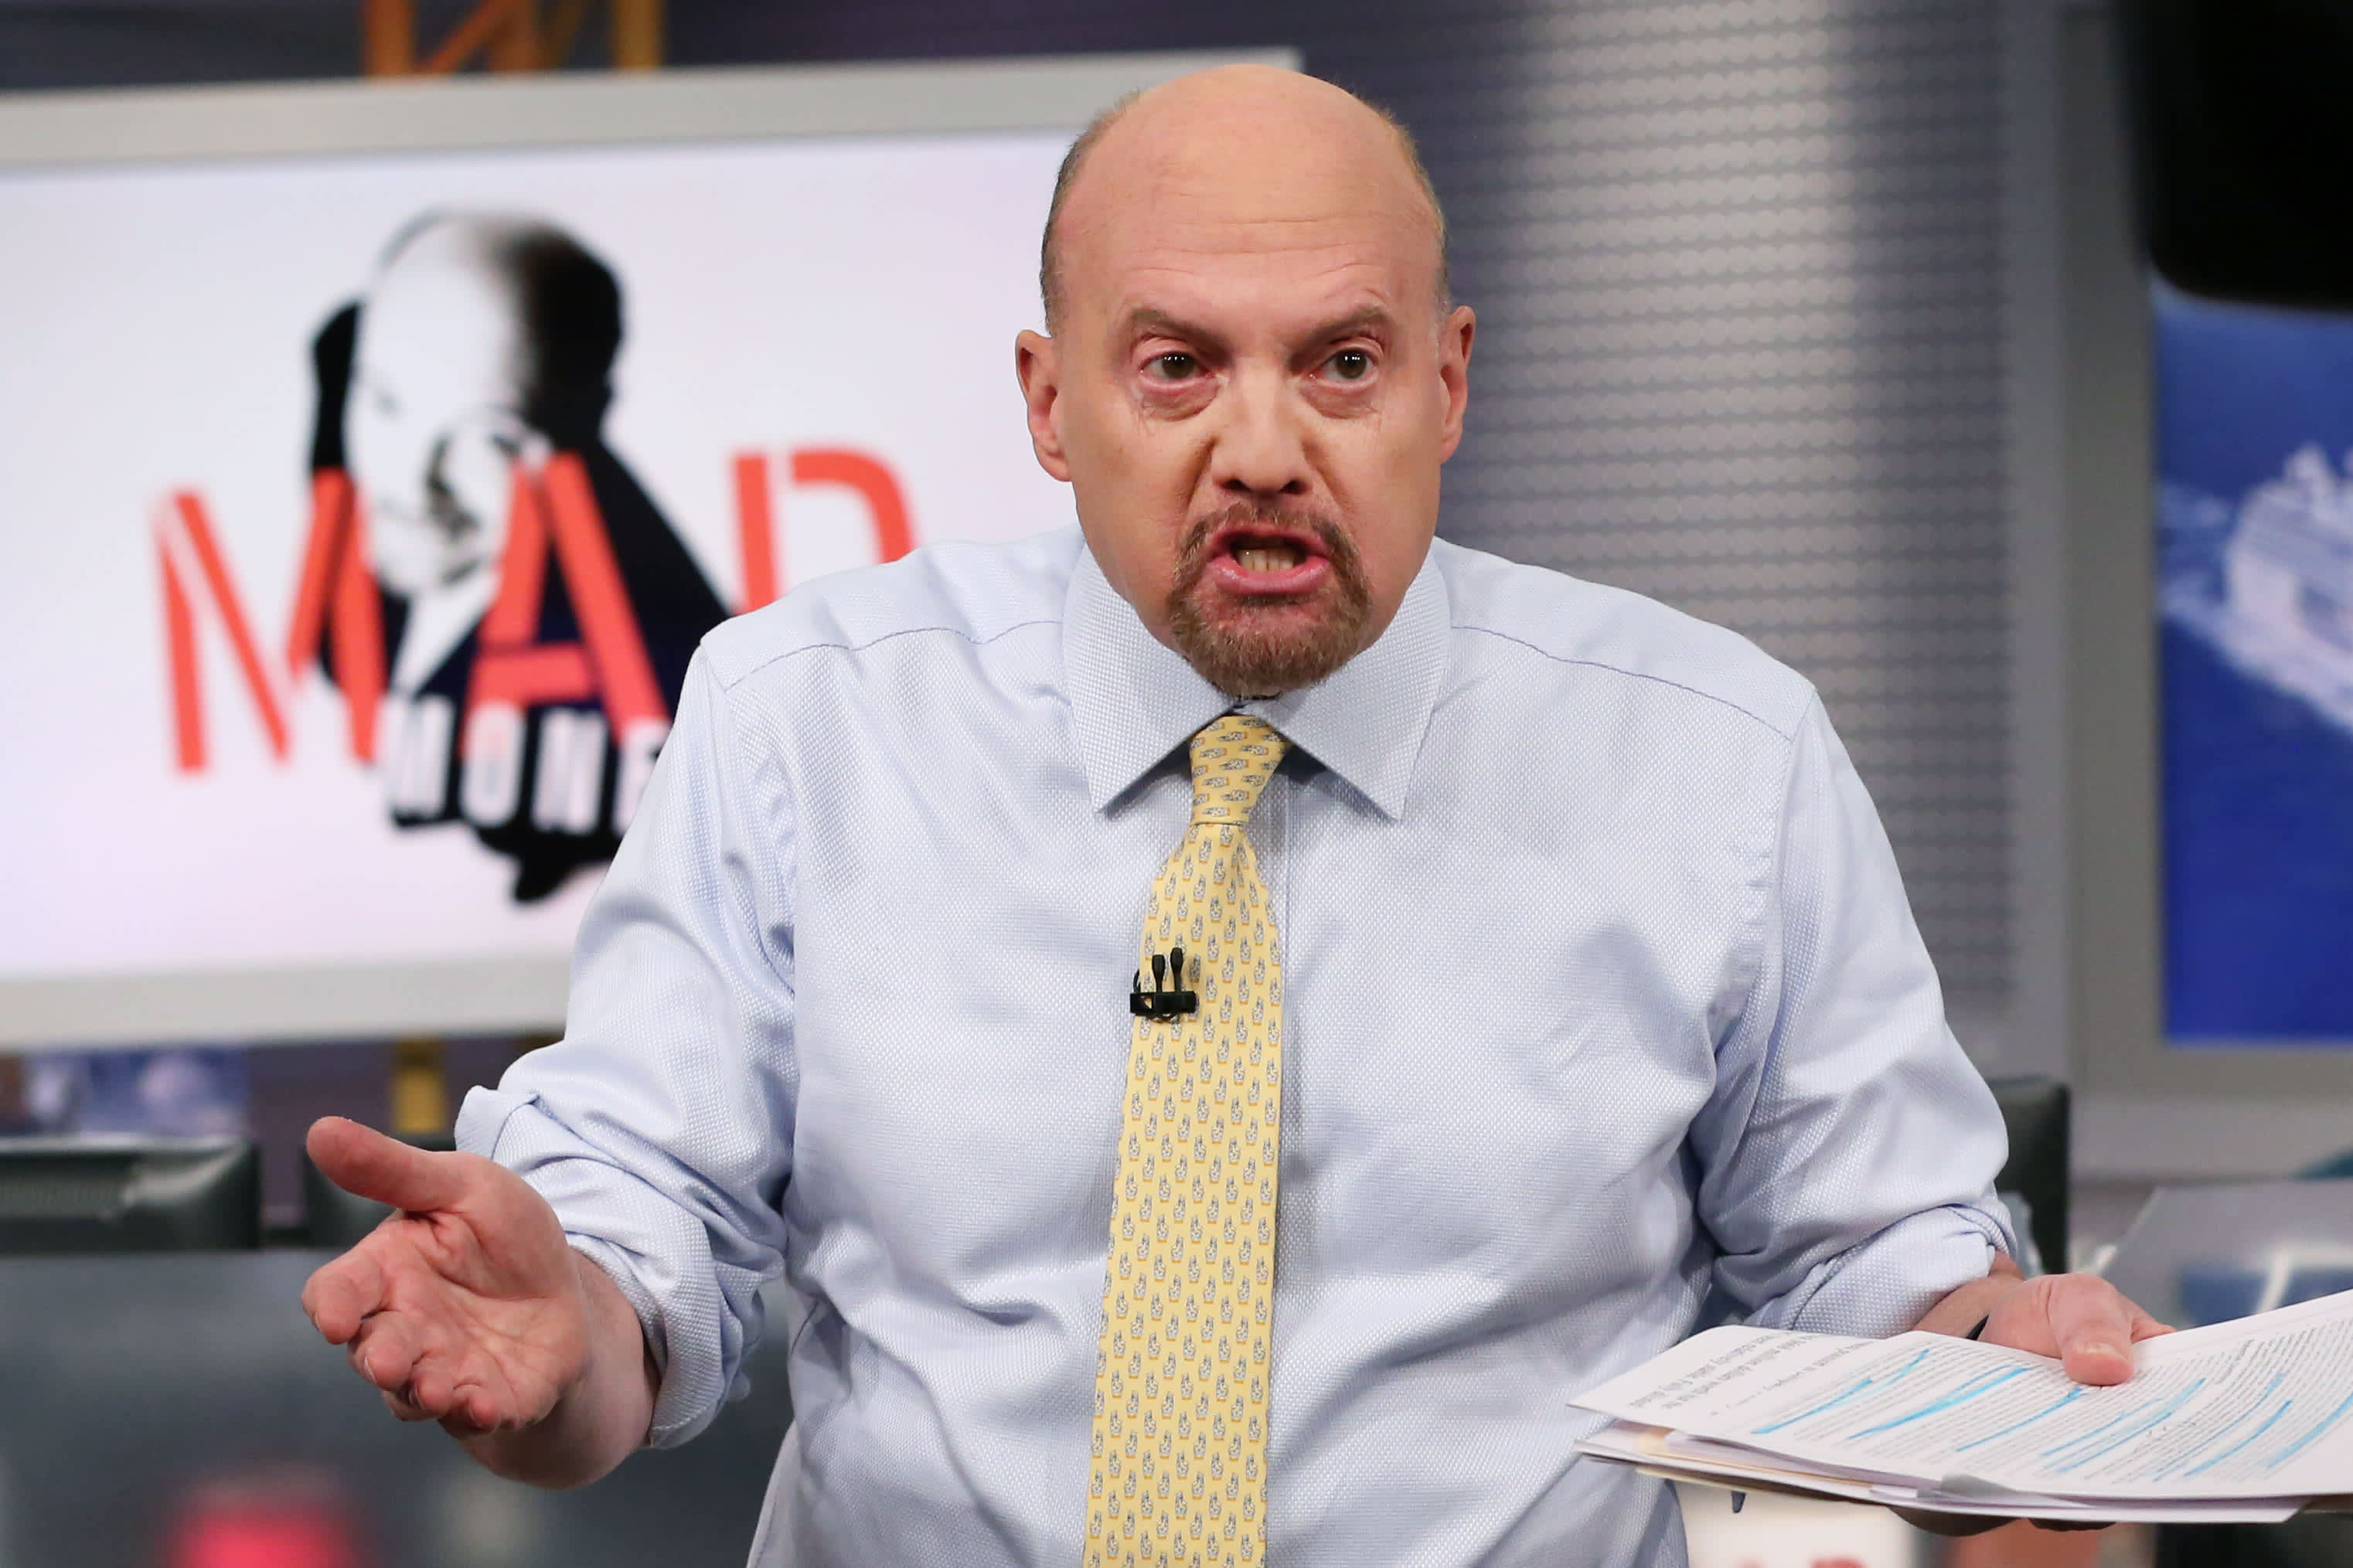 Jim Cramer says Big Tech megacaps valuation is well deserved